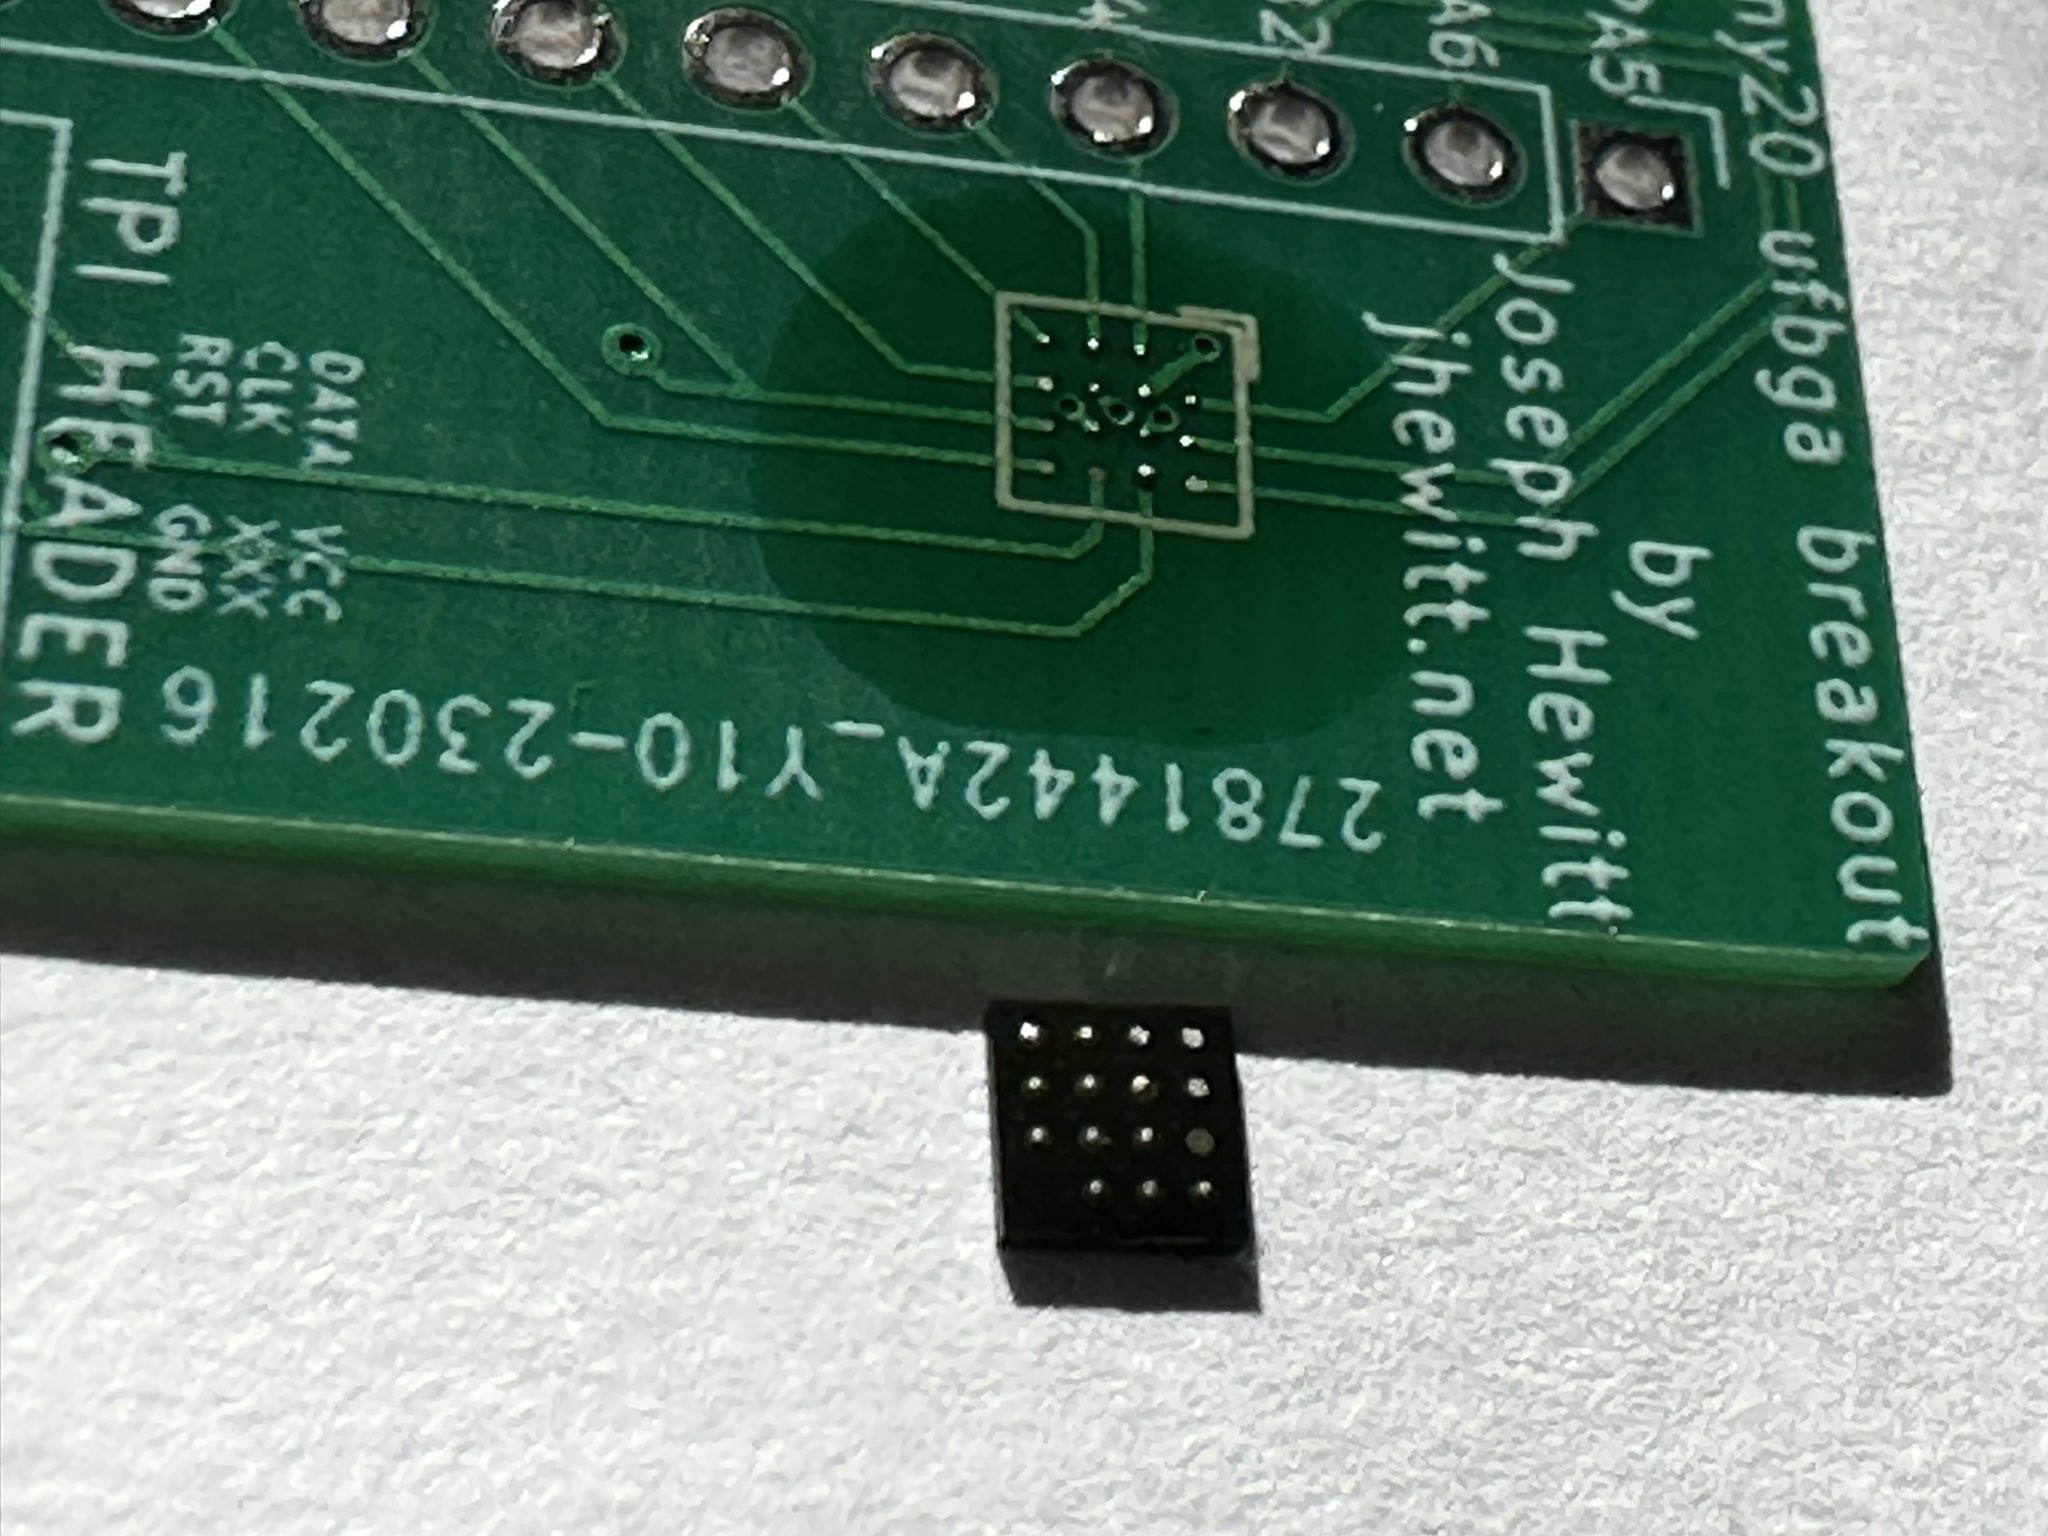 attiny20-removed-from-pcb.jpg